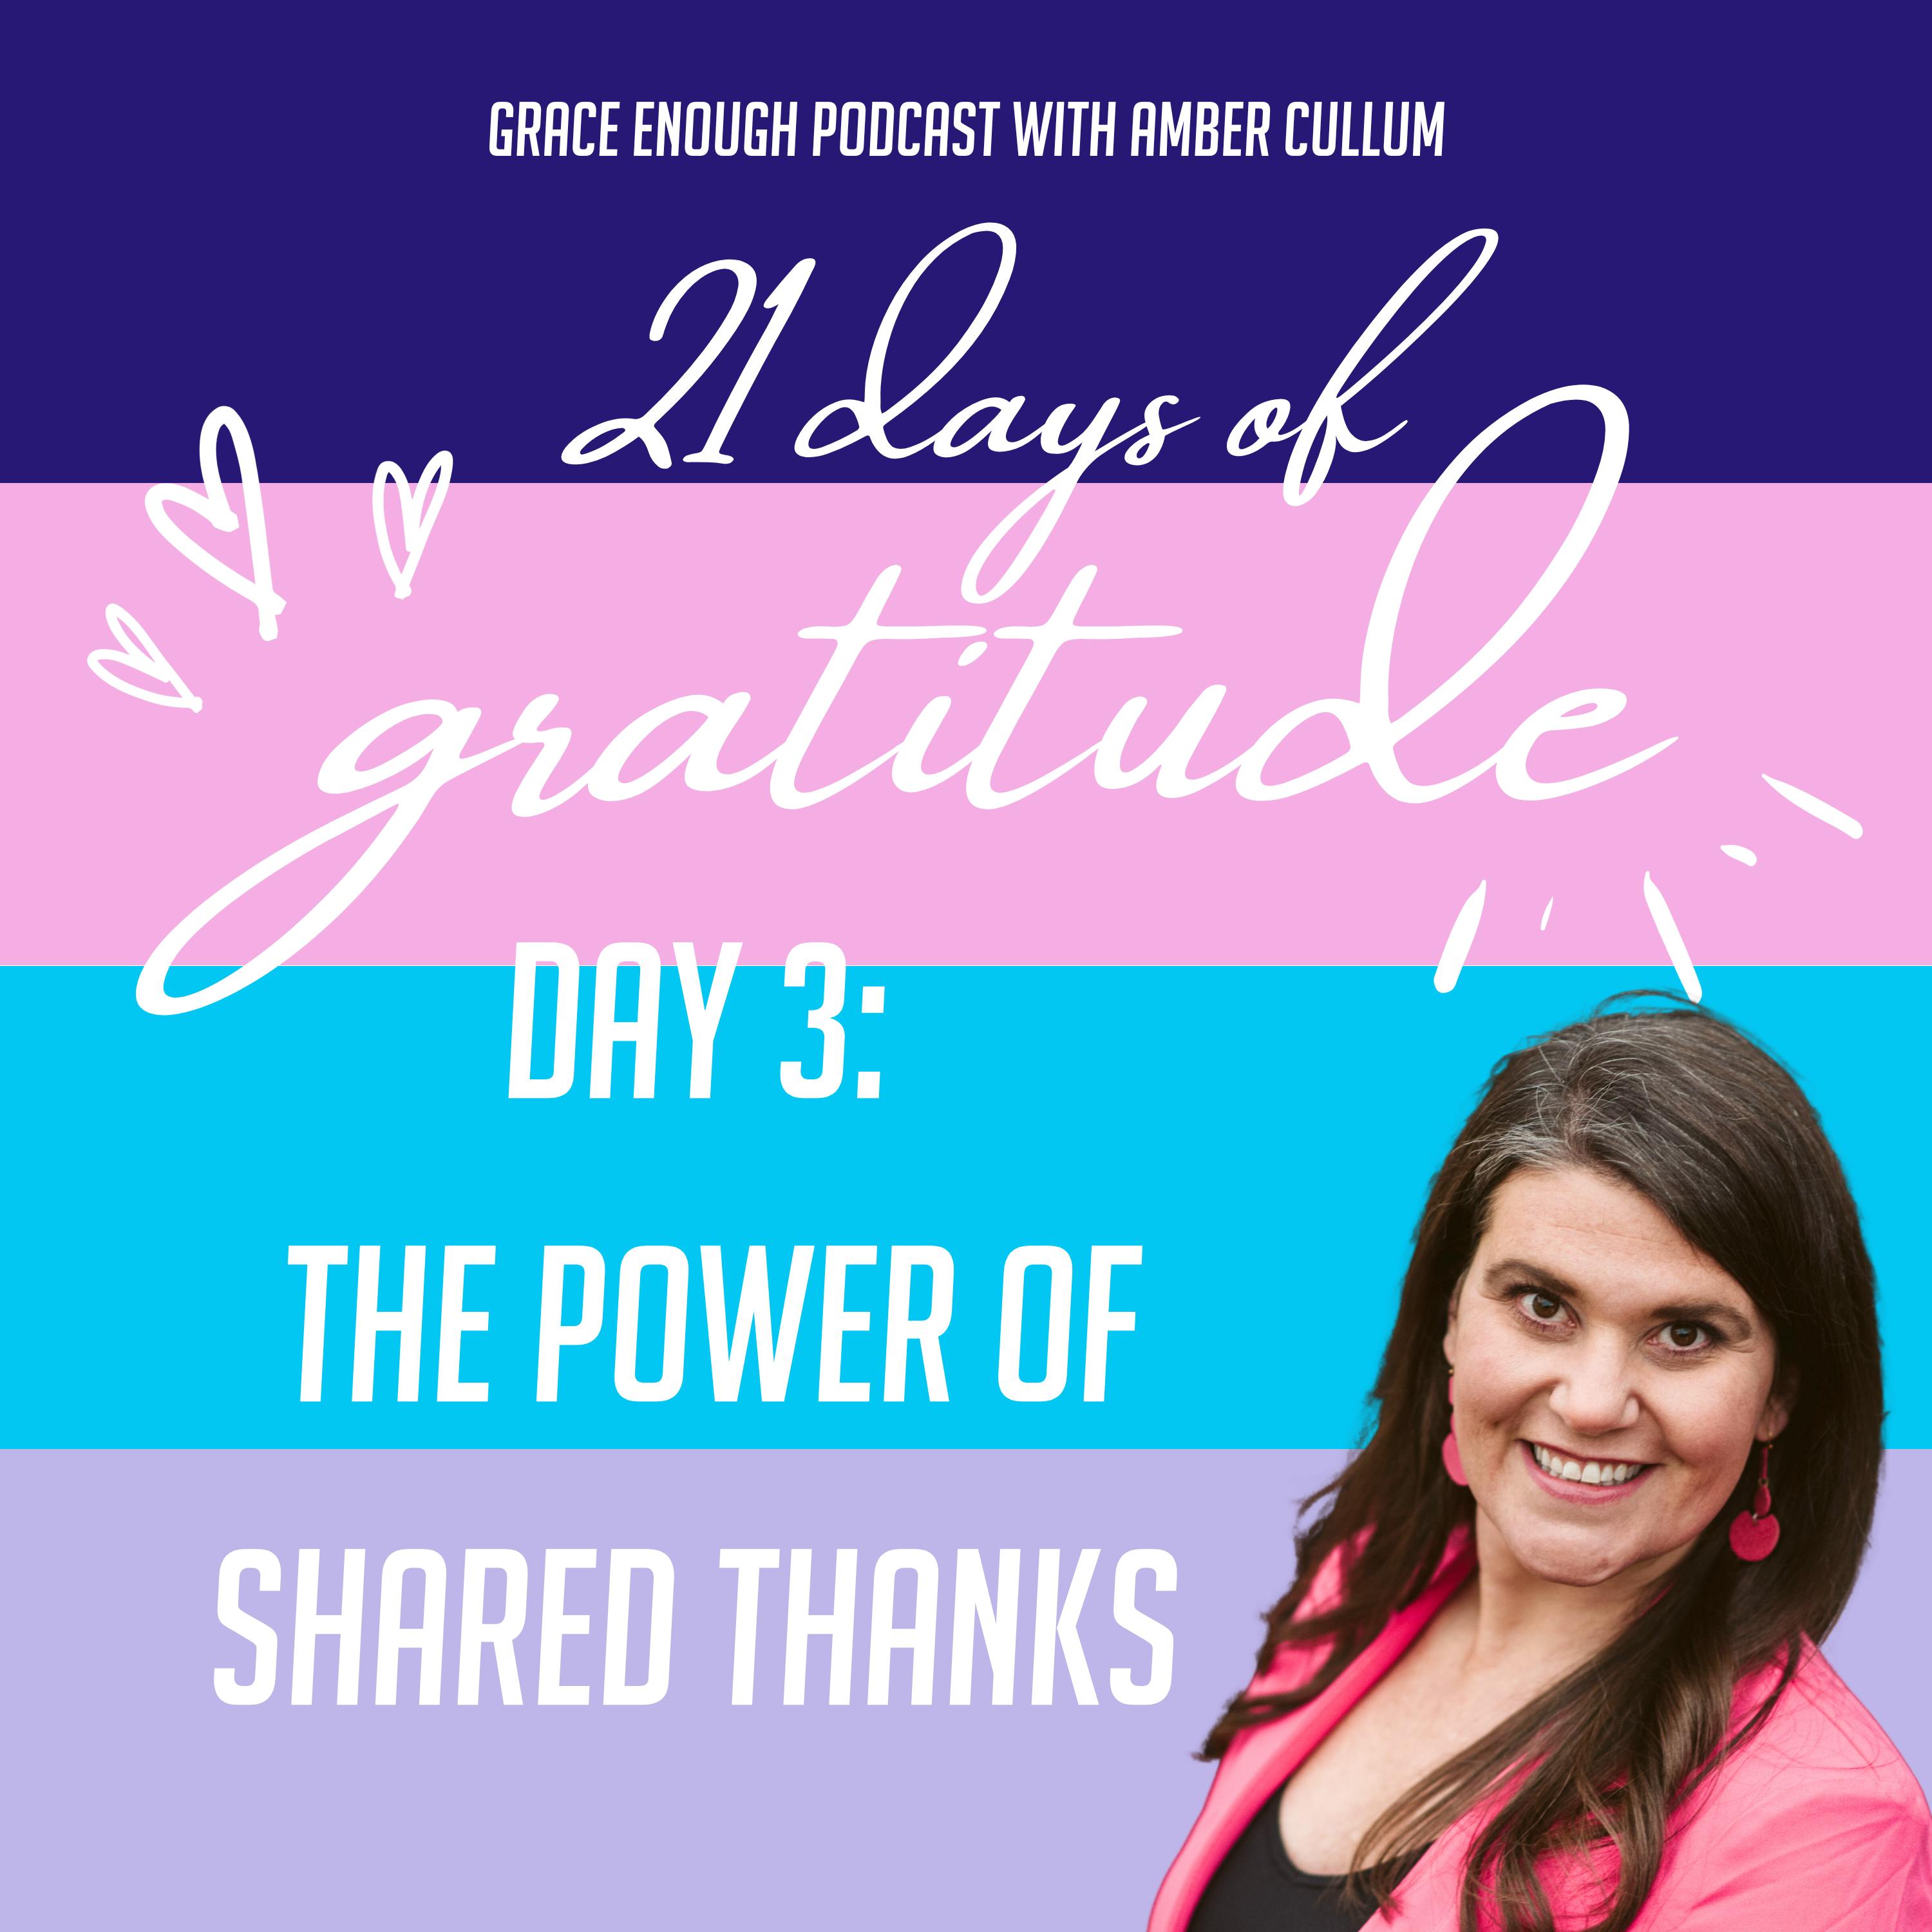 3/21 Days of Gratitude: The Power of Shared Thanks